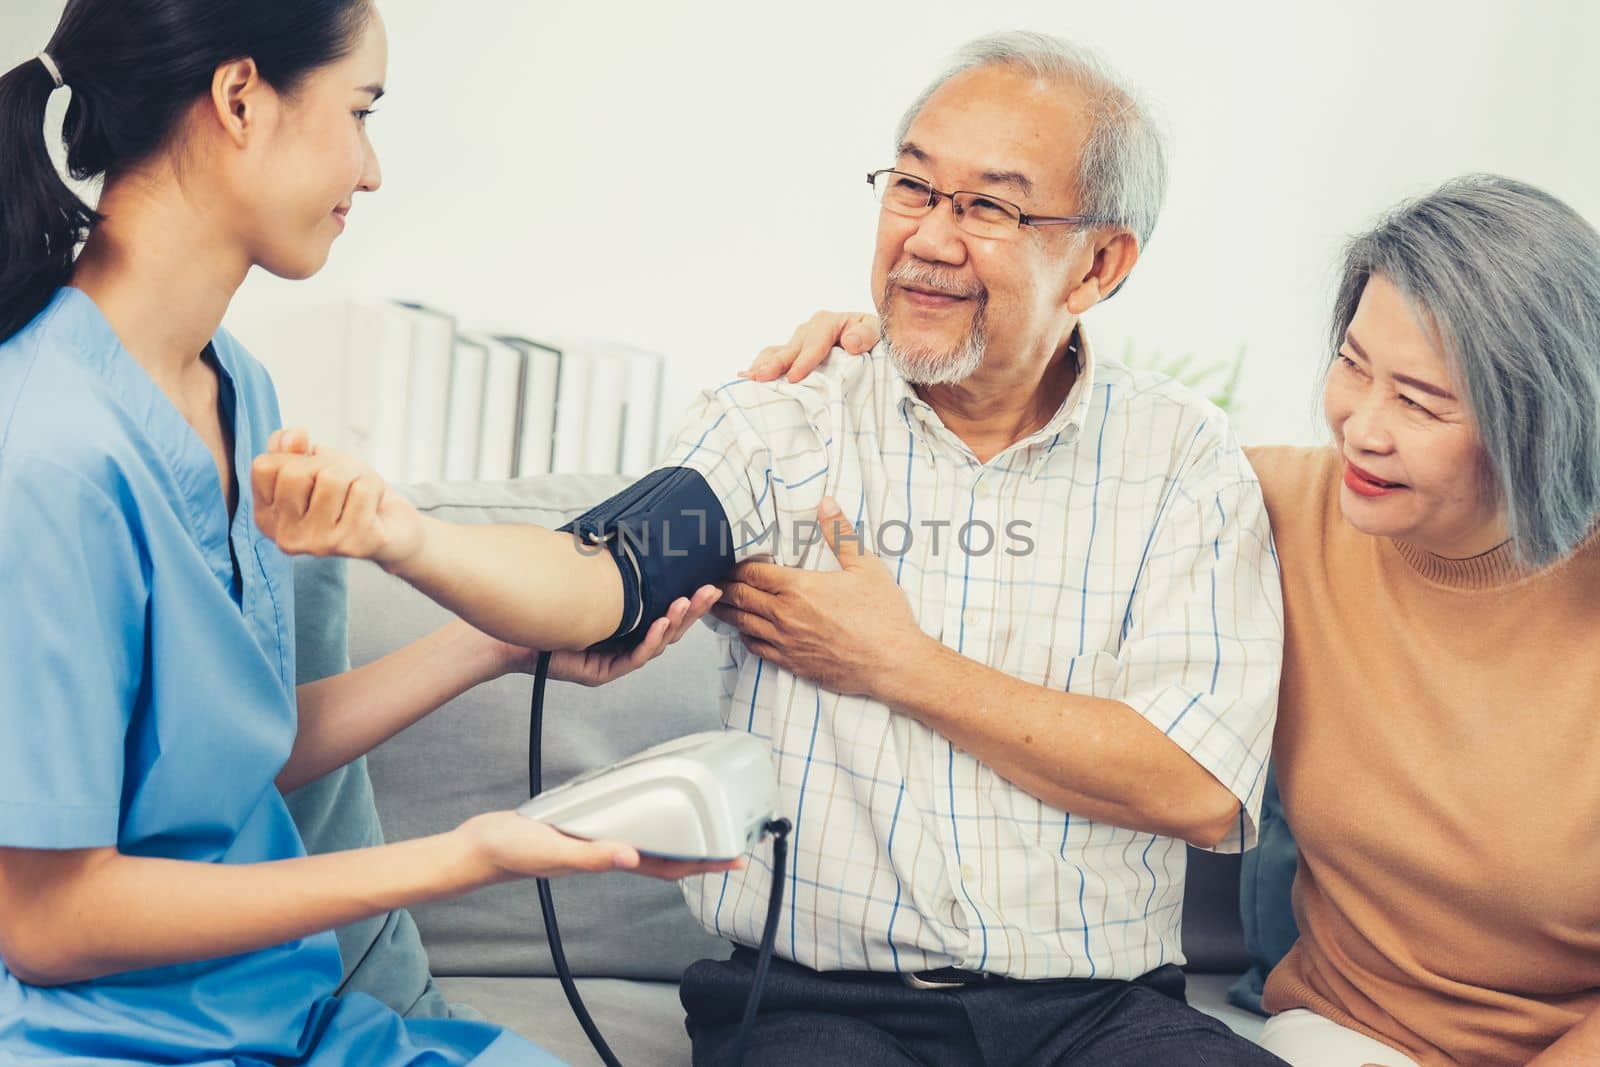 An elderly man having a blood pressure check by his personal caregiver with his wife sitting next to him in their home.